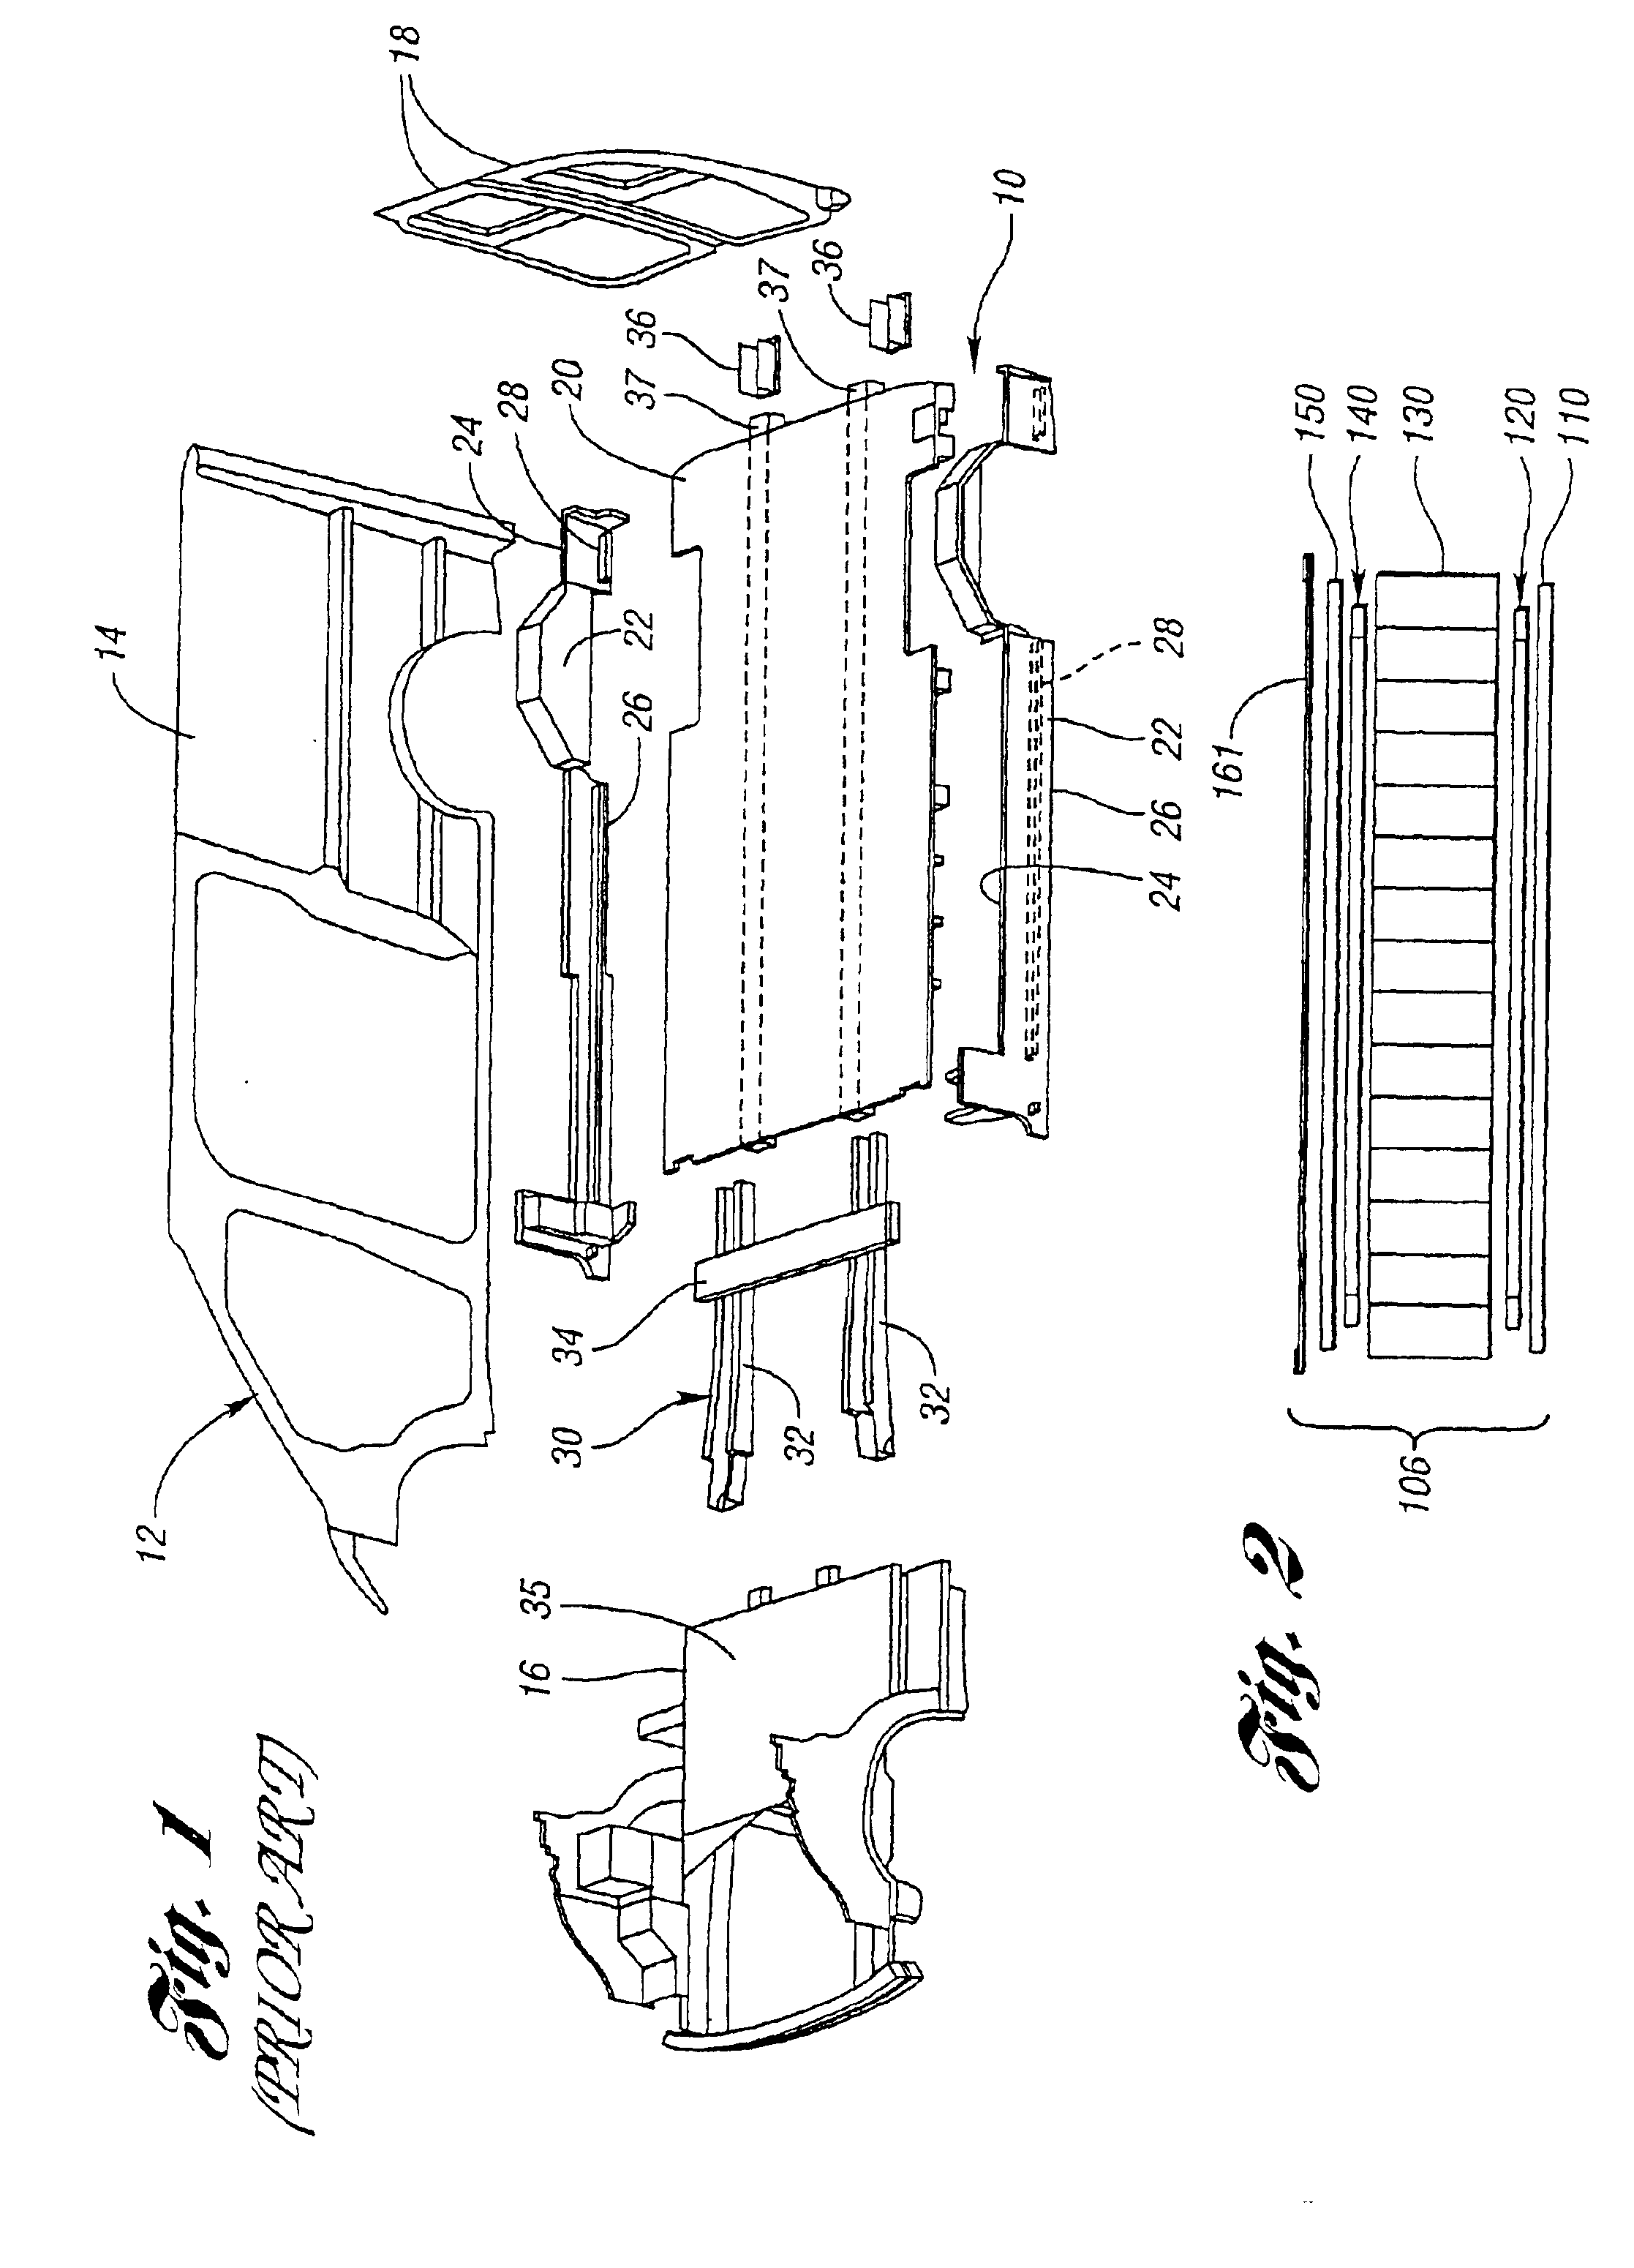 Reinforced composite vehicle load floor of the cellular core sandwich-type